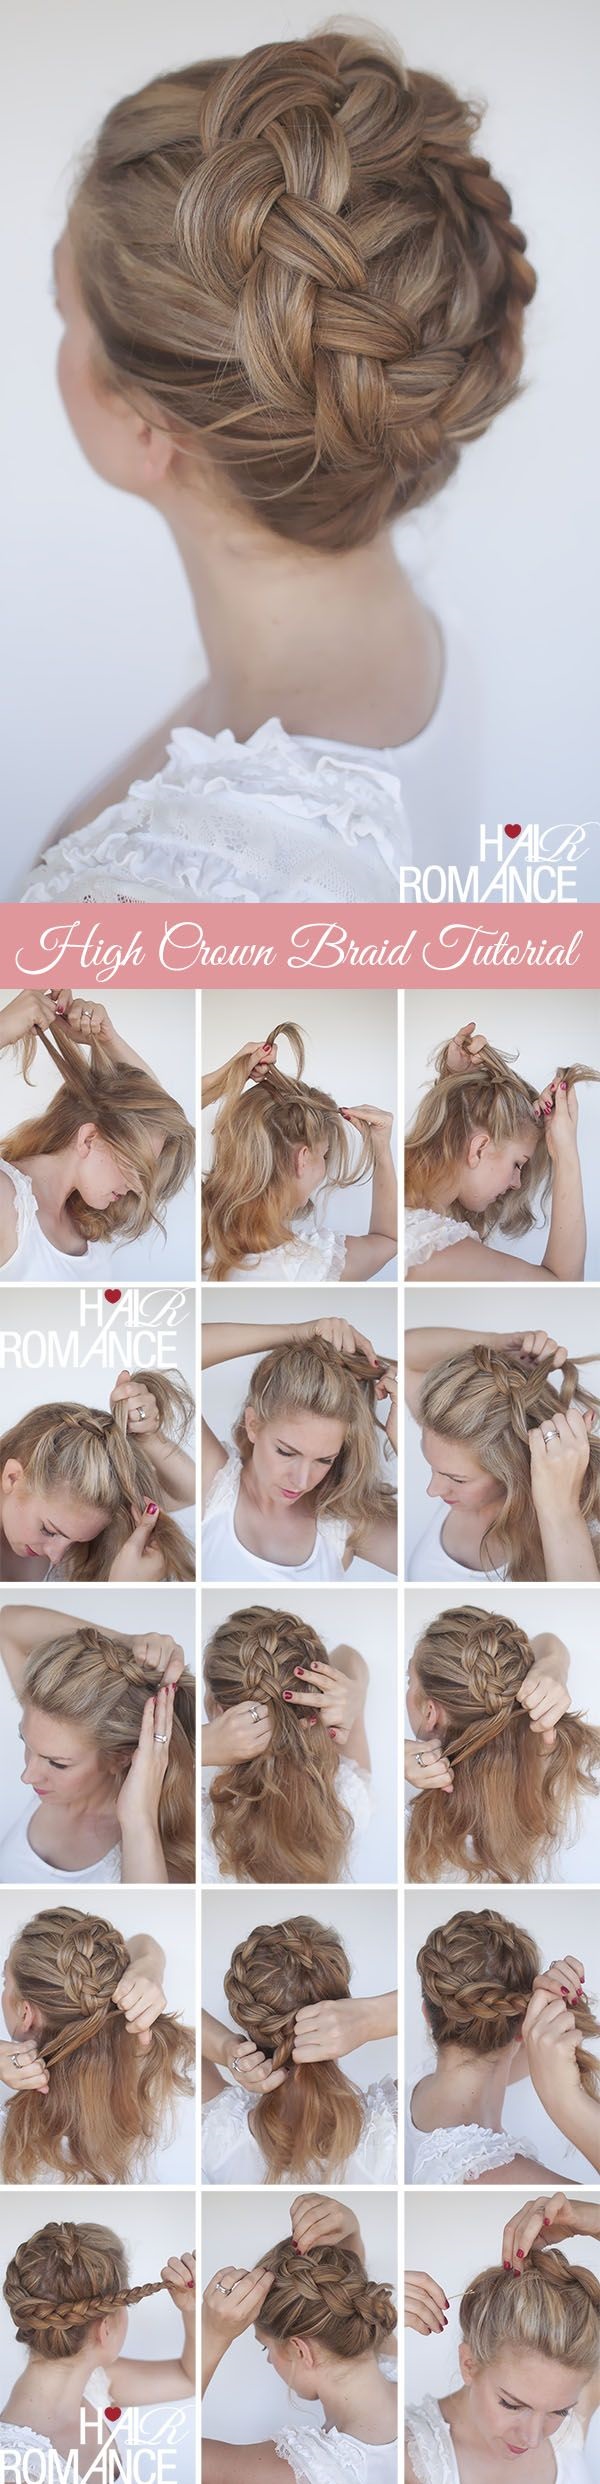 Simple Five Minute Hairstyles (35)